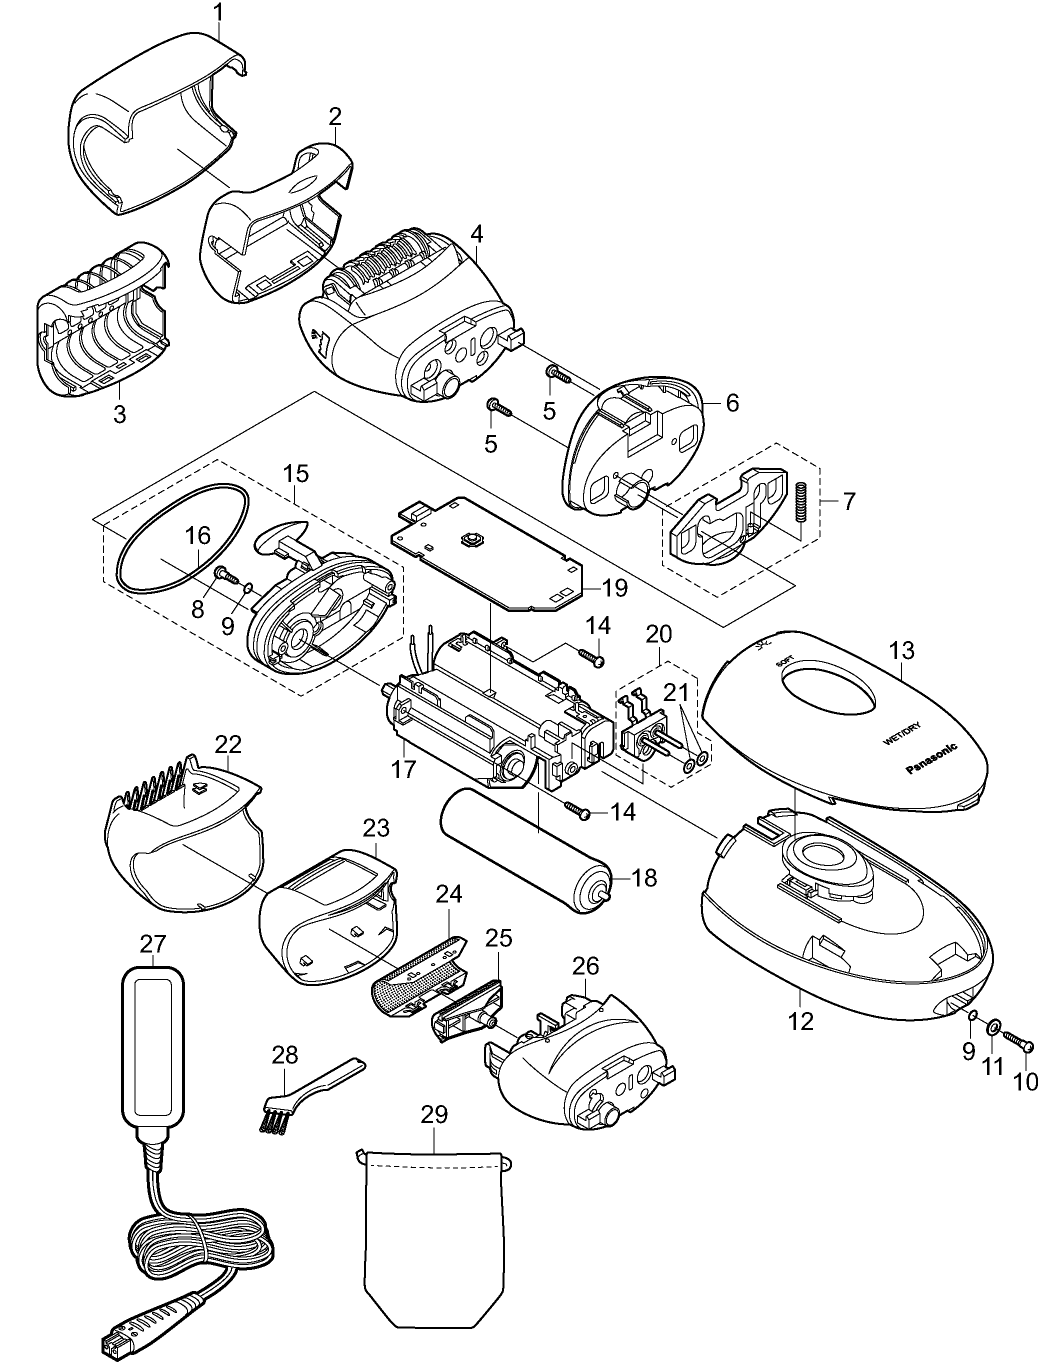 ES-ED50: Exploded View